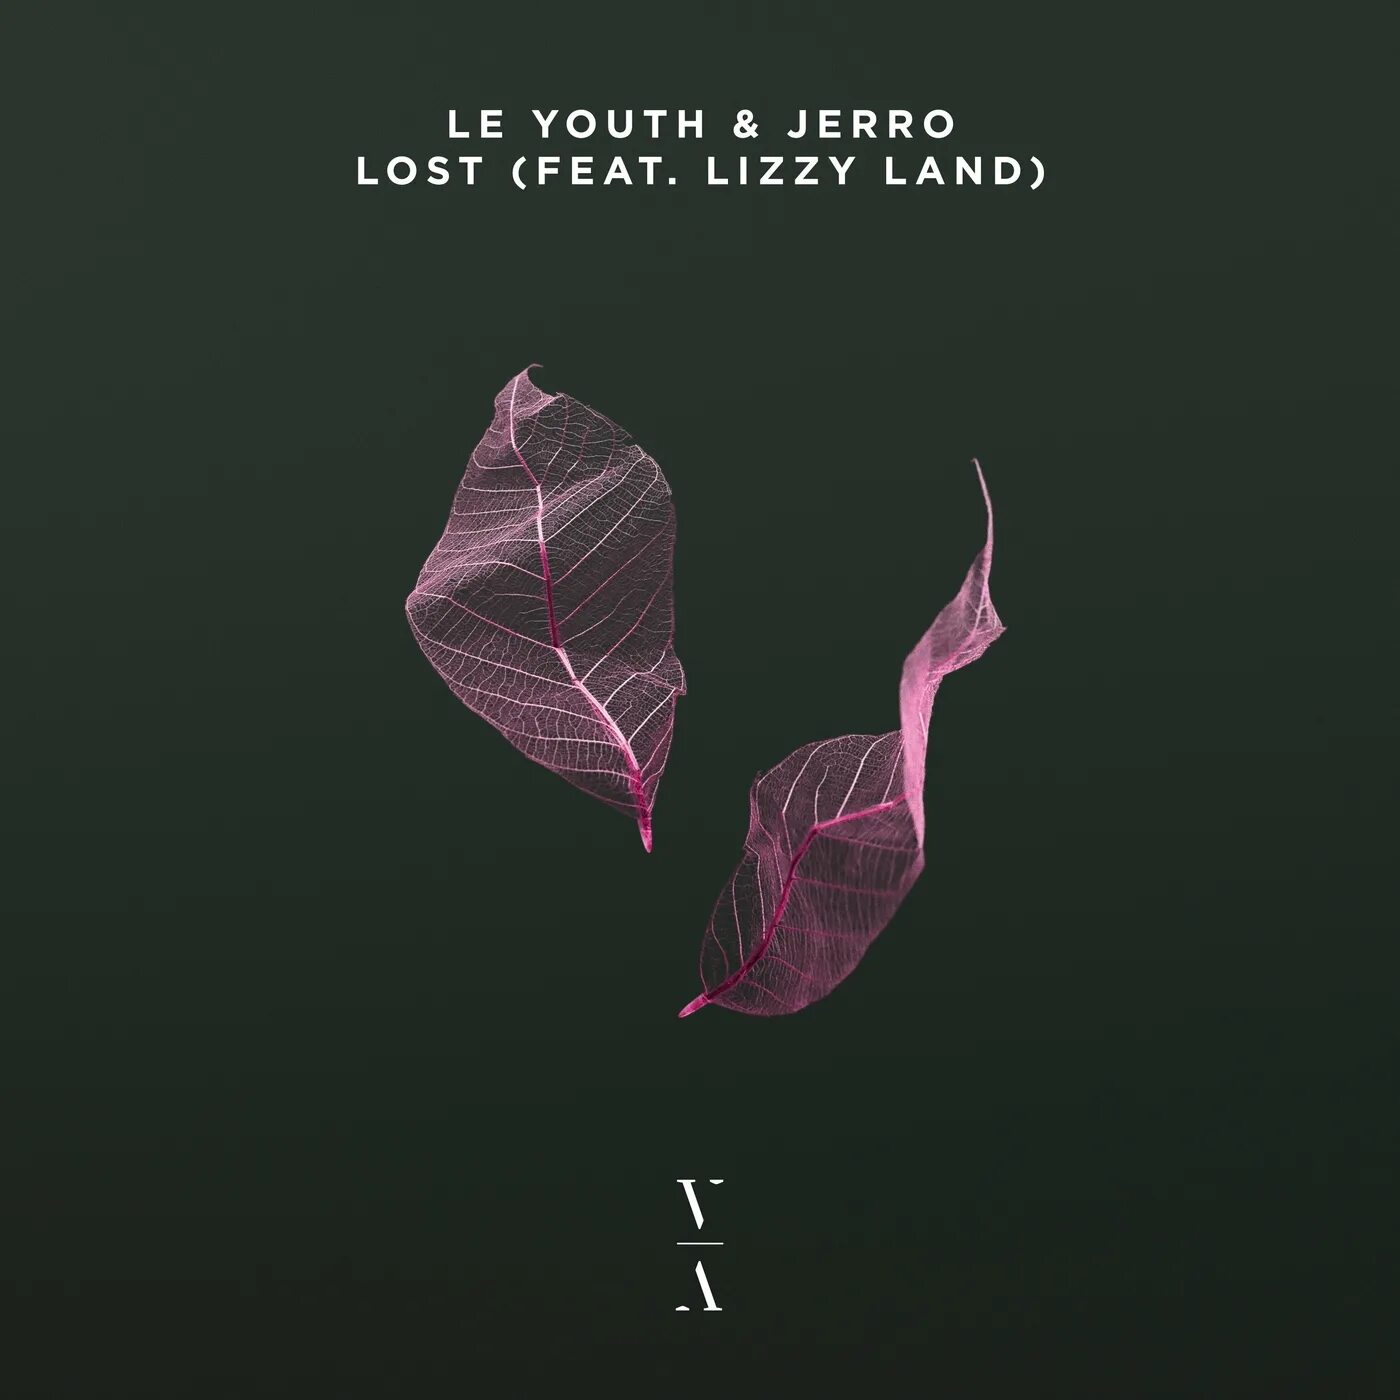 Digital hallucination feat lizzie freeman. Lizzy Land. Le Youth. Goodbye le Youth. EMBRZ - IOU (feat. Lizzy Land)..